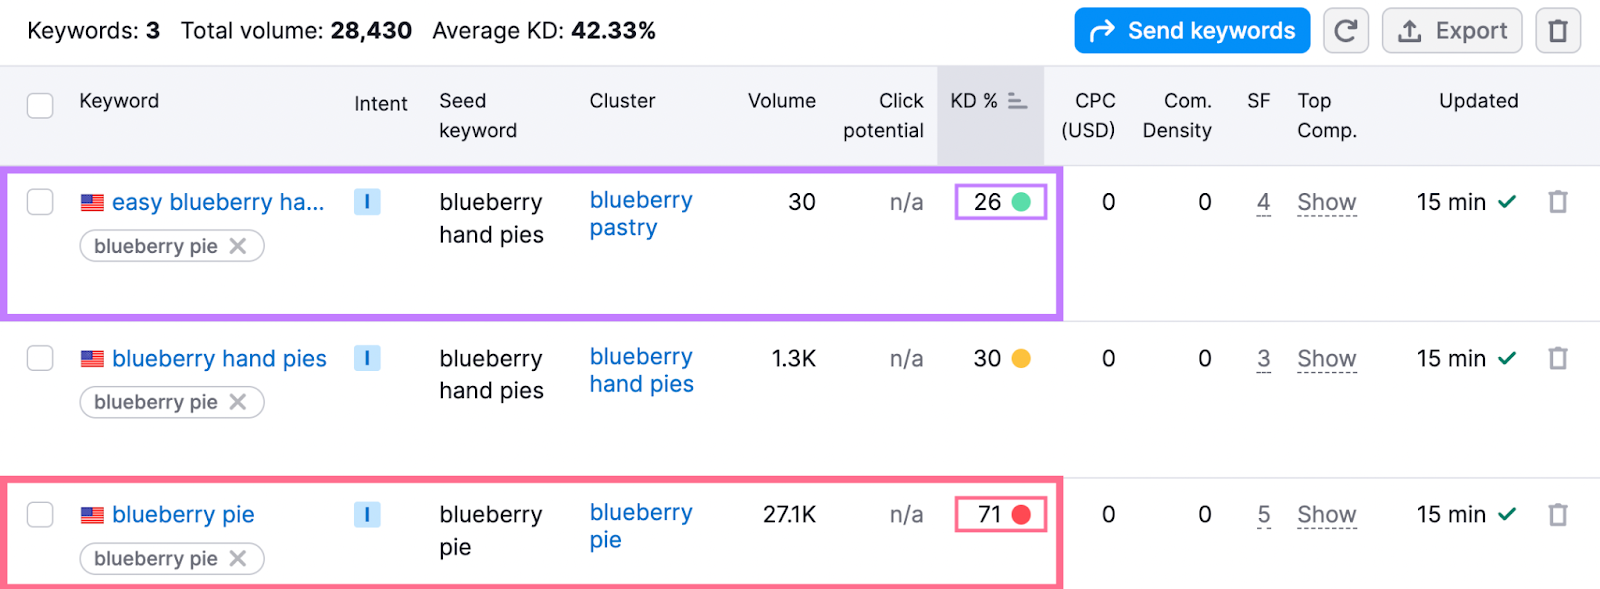 Metrics shown for “blueberry hand pies” or “mini blueberry pies” show lower search volume and competition